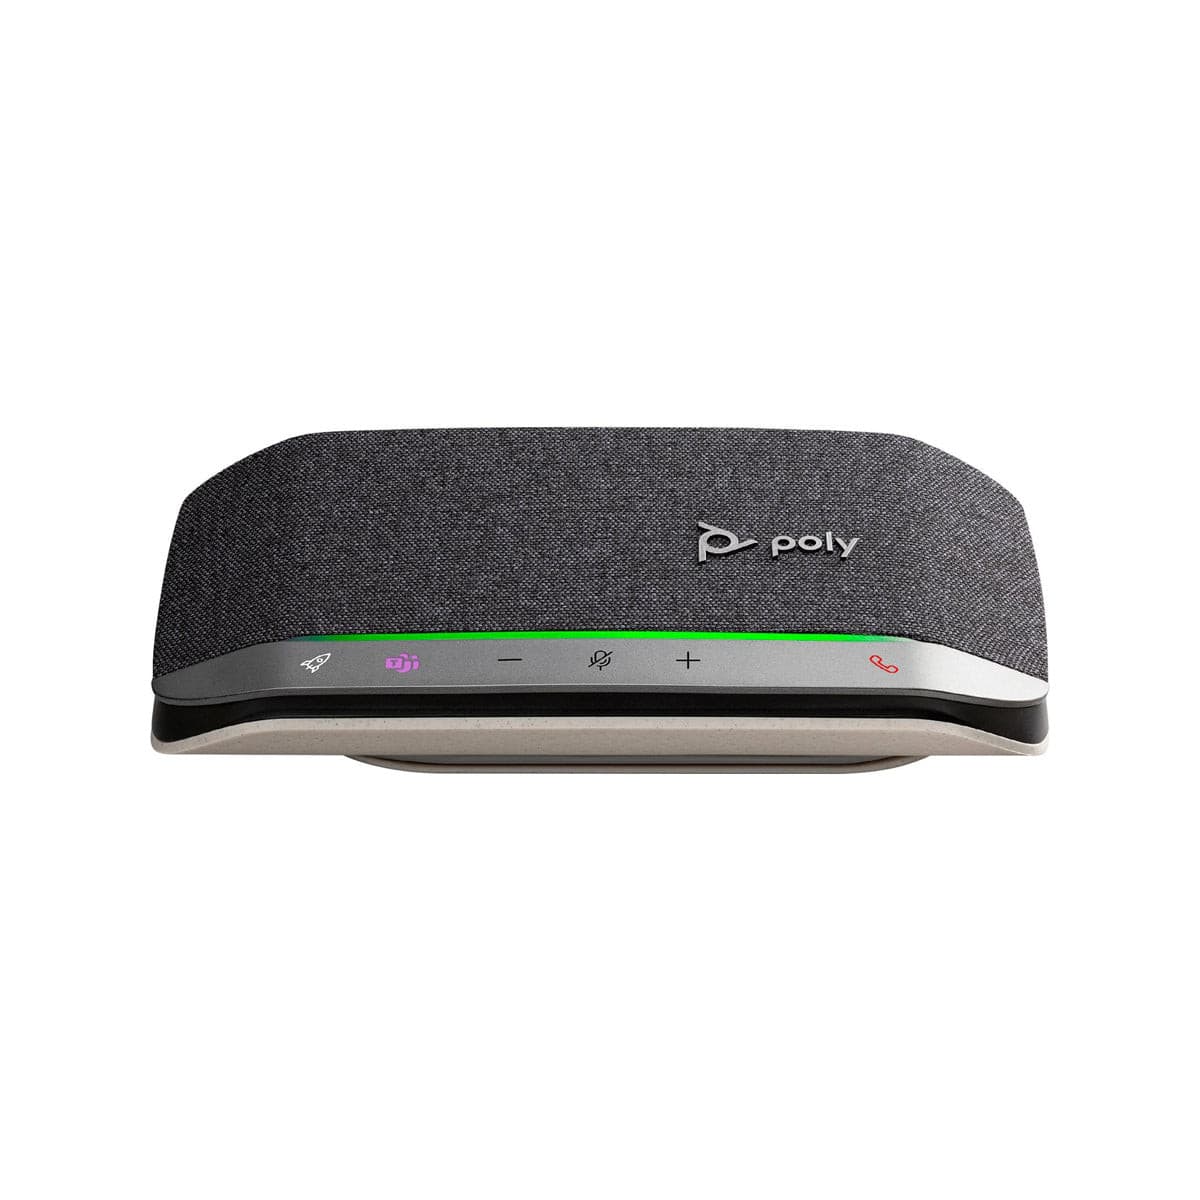 Poly Sync 20 USB Smart Speakerphone for Home Office.